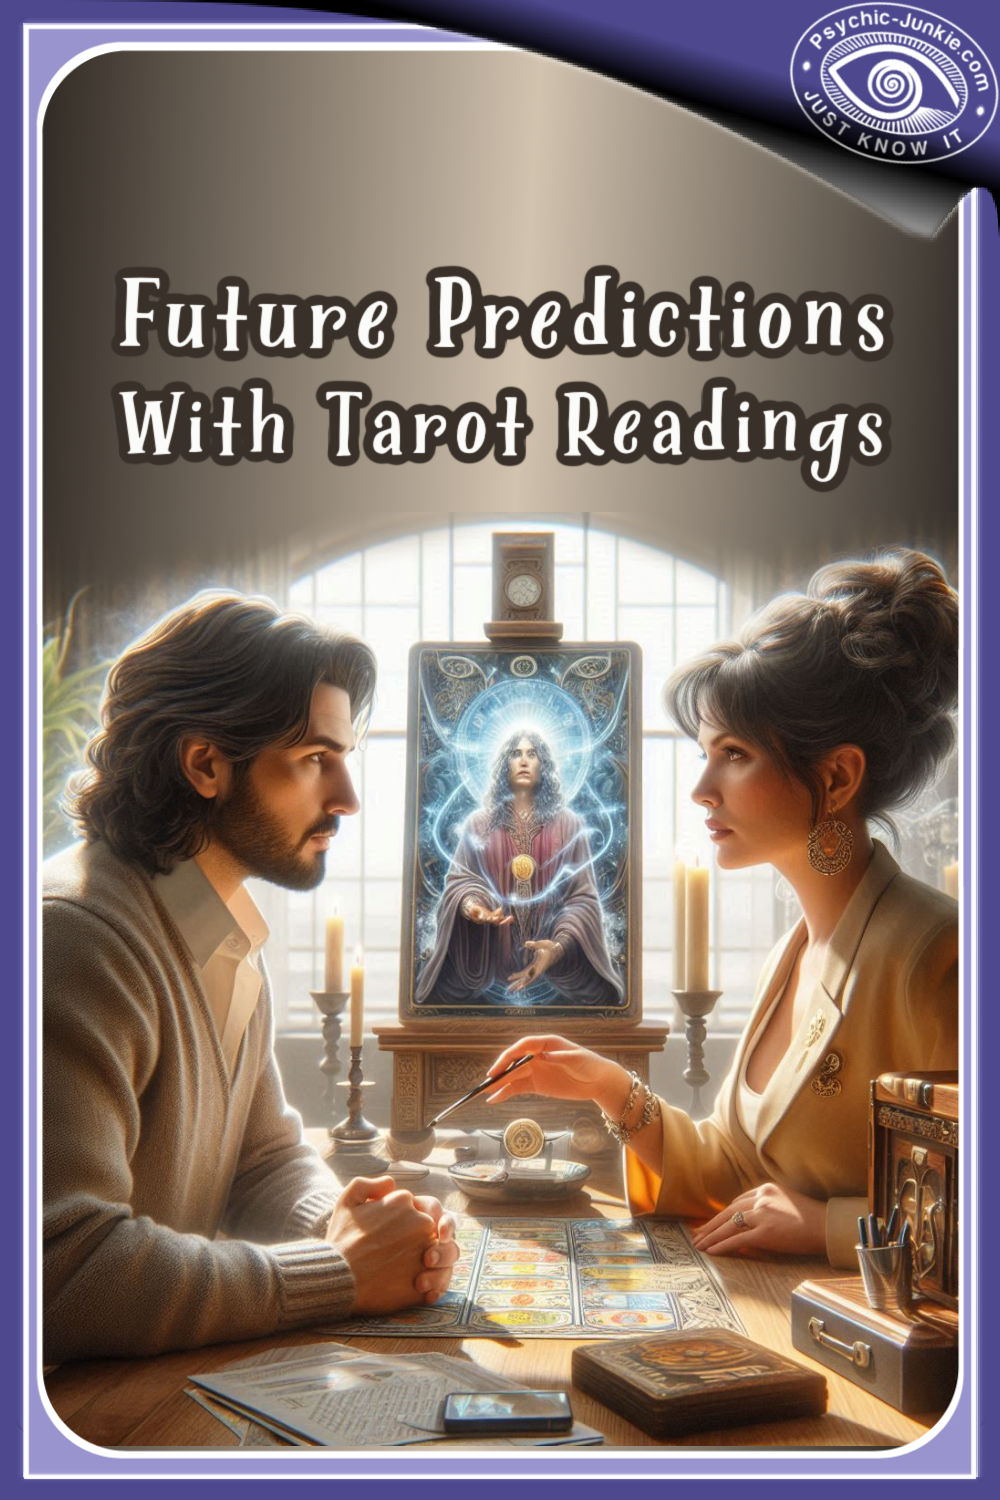 Future Predictions With Tarot Readings